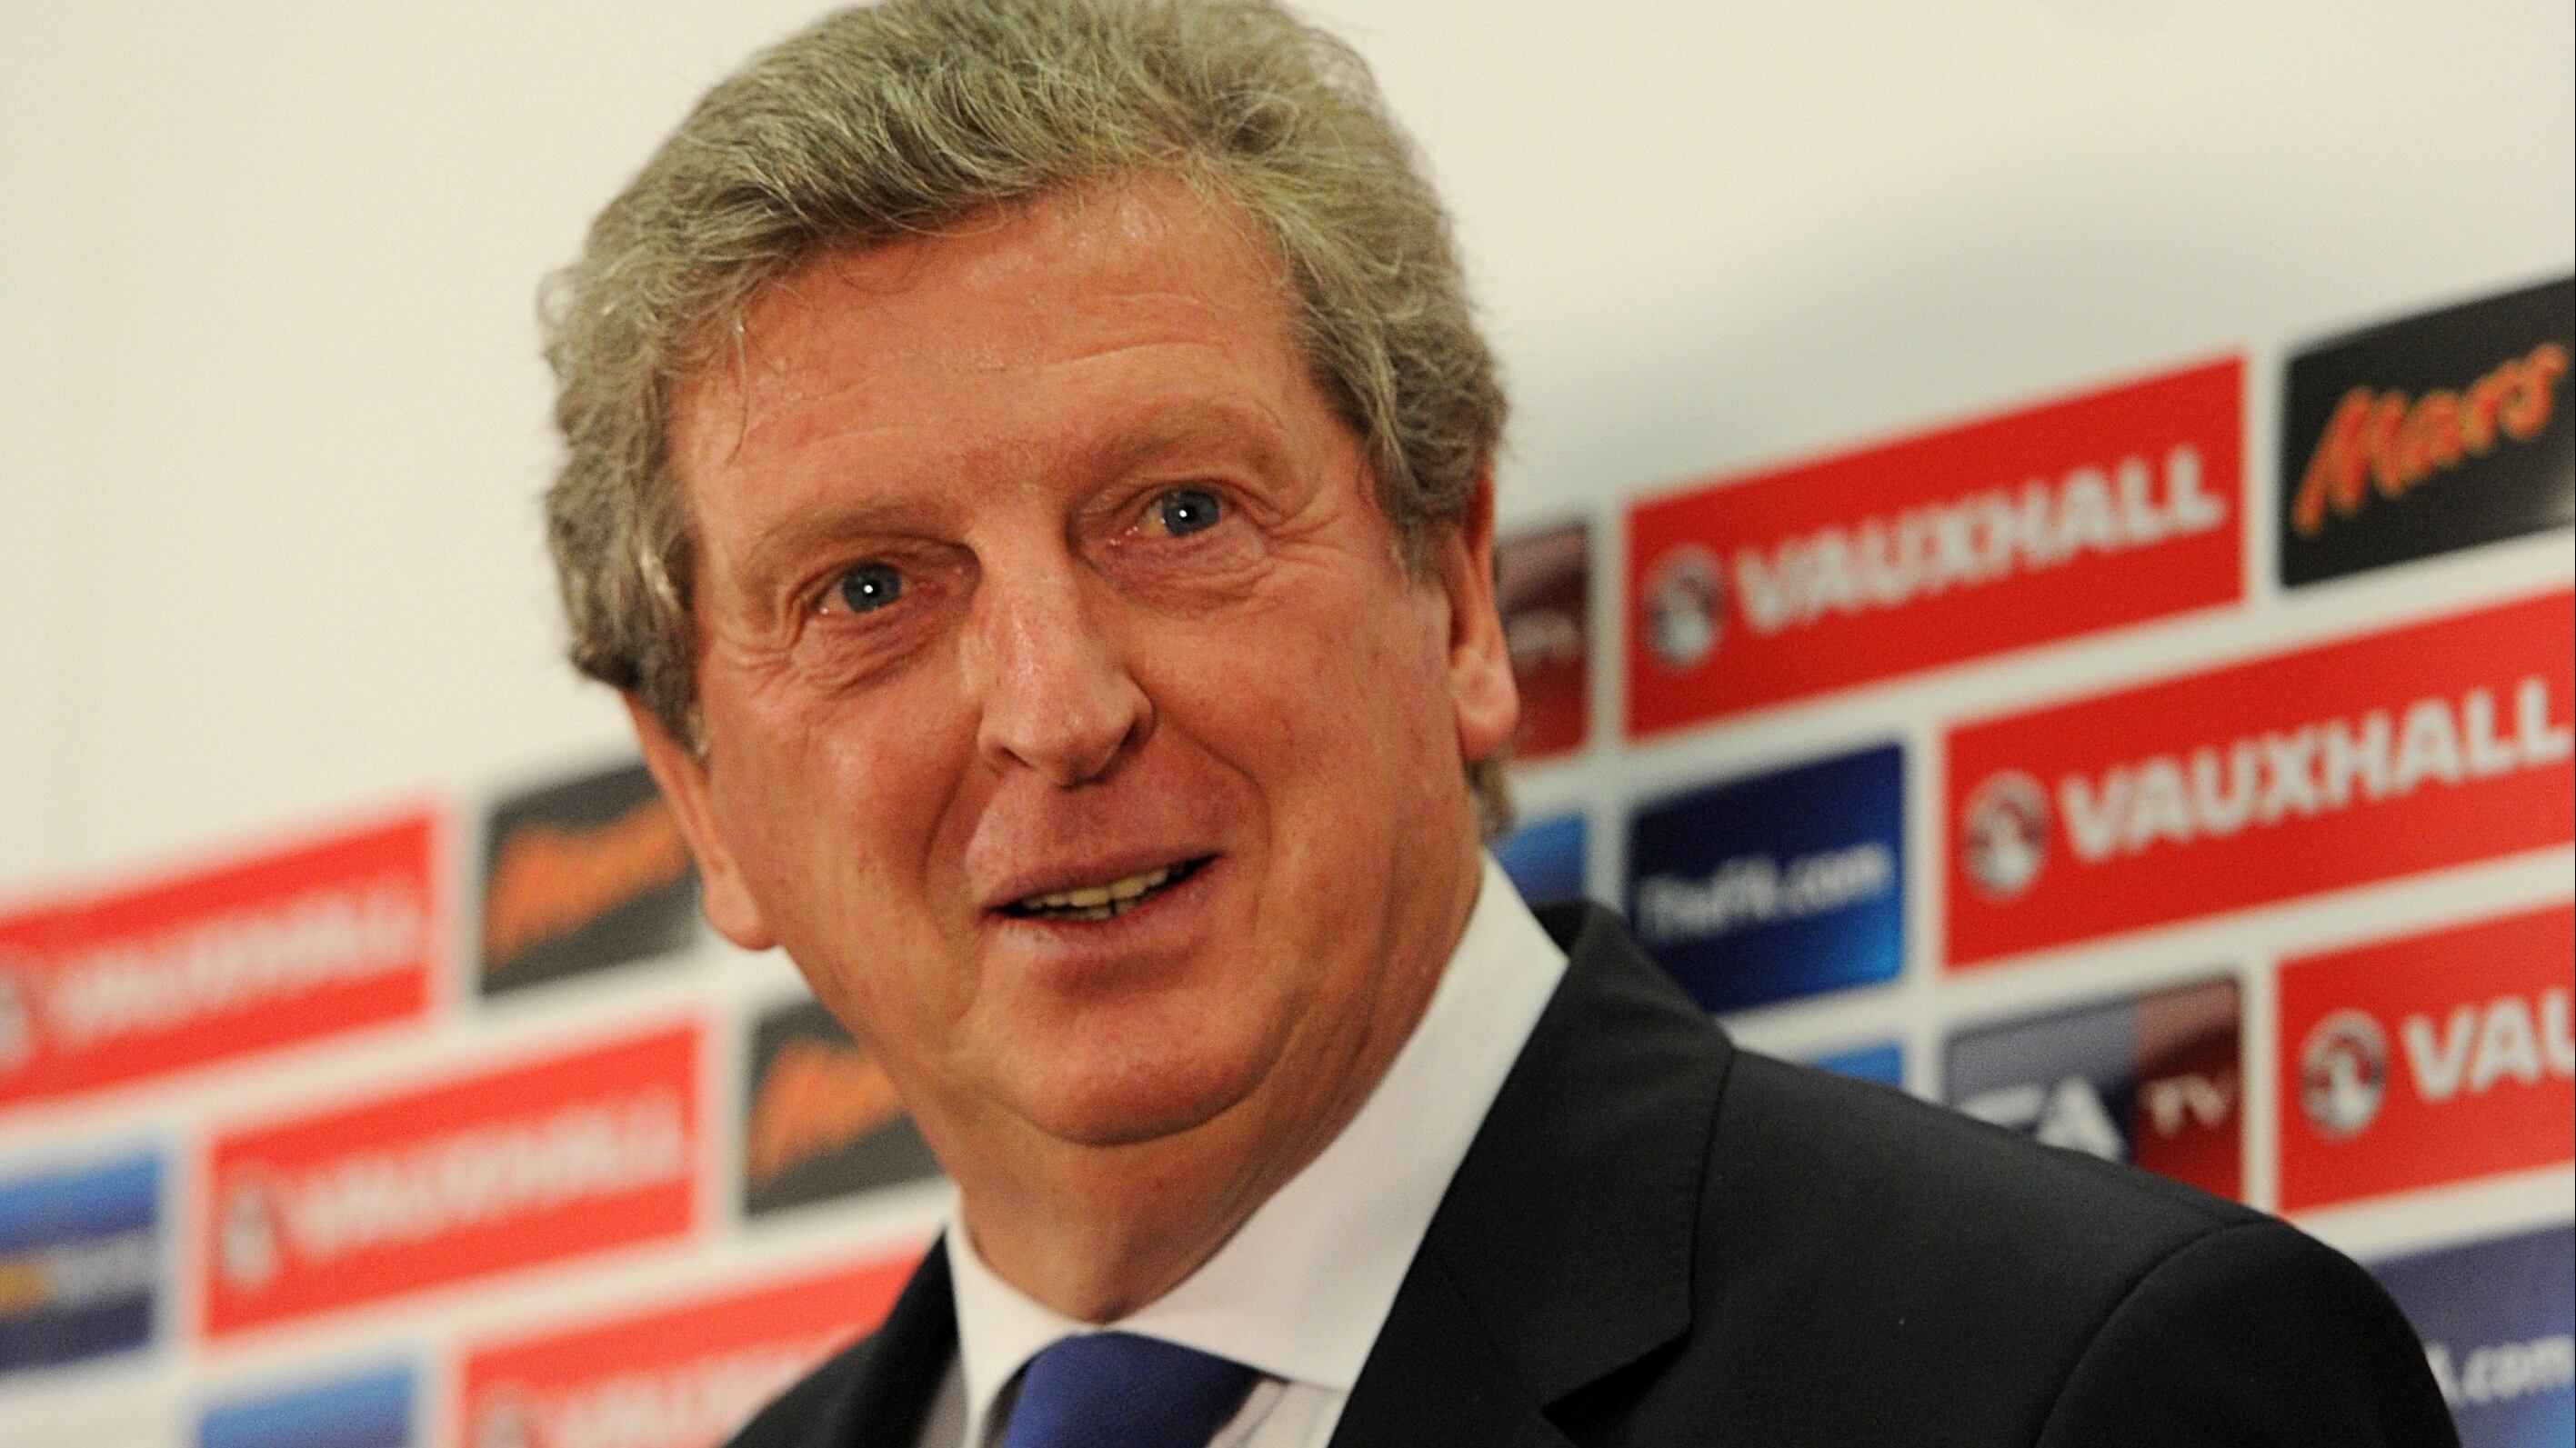 Roy Hodgson was appointed England manager in 2012